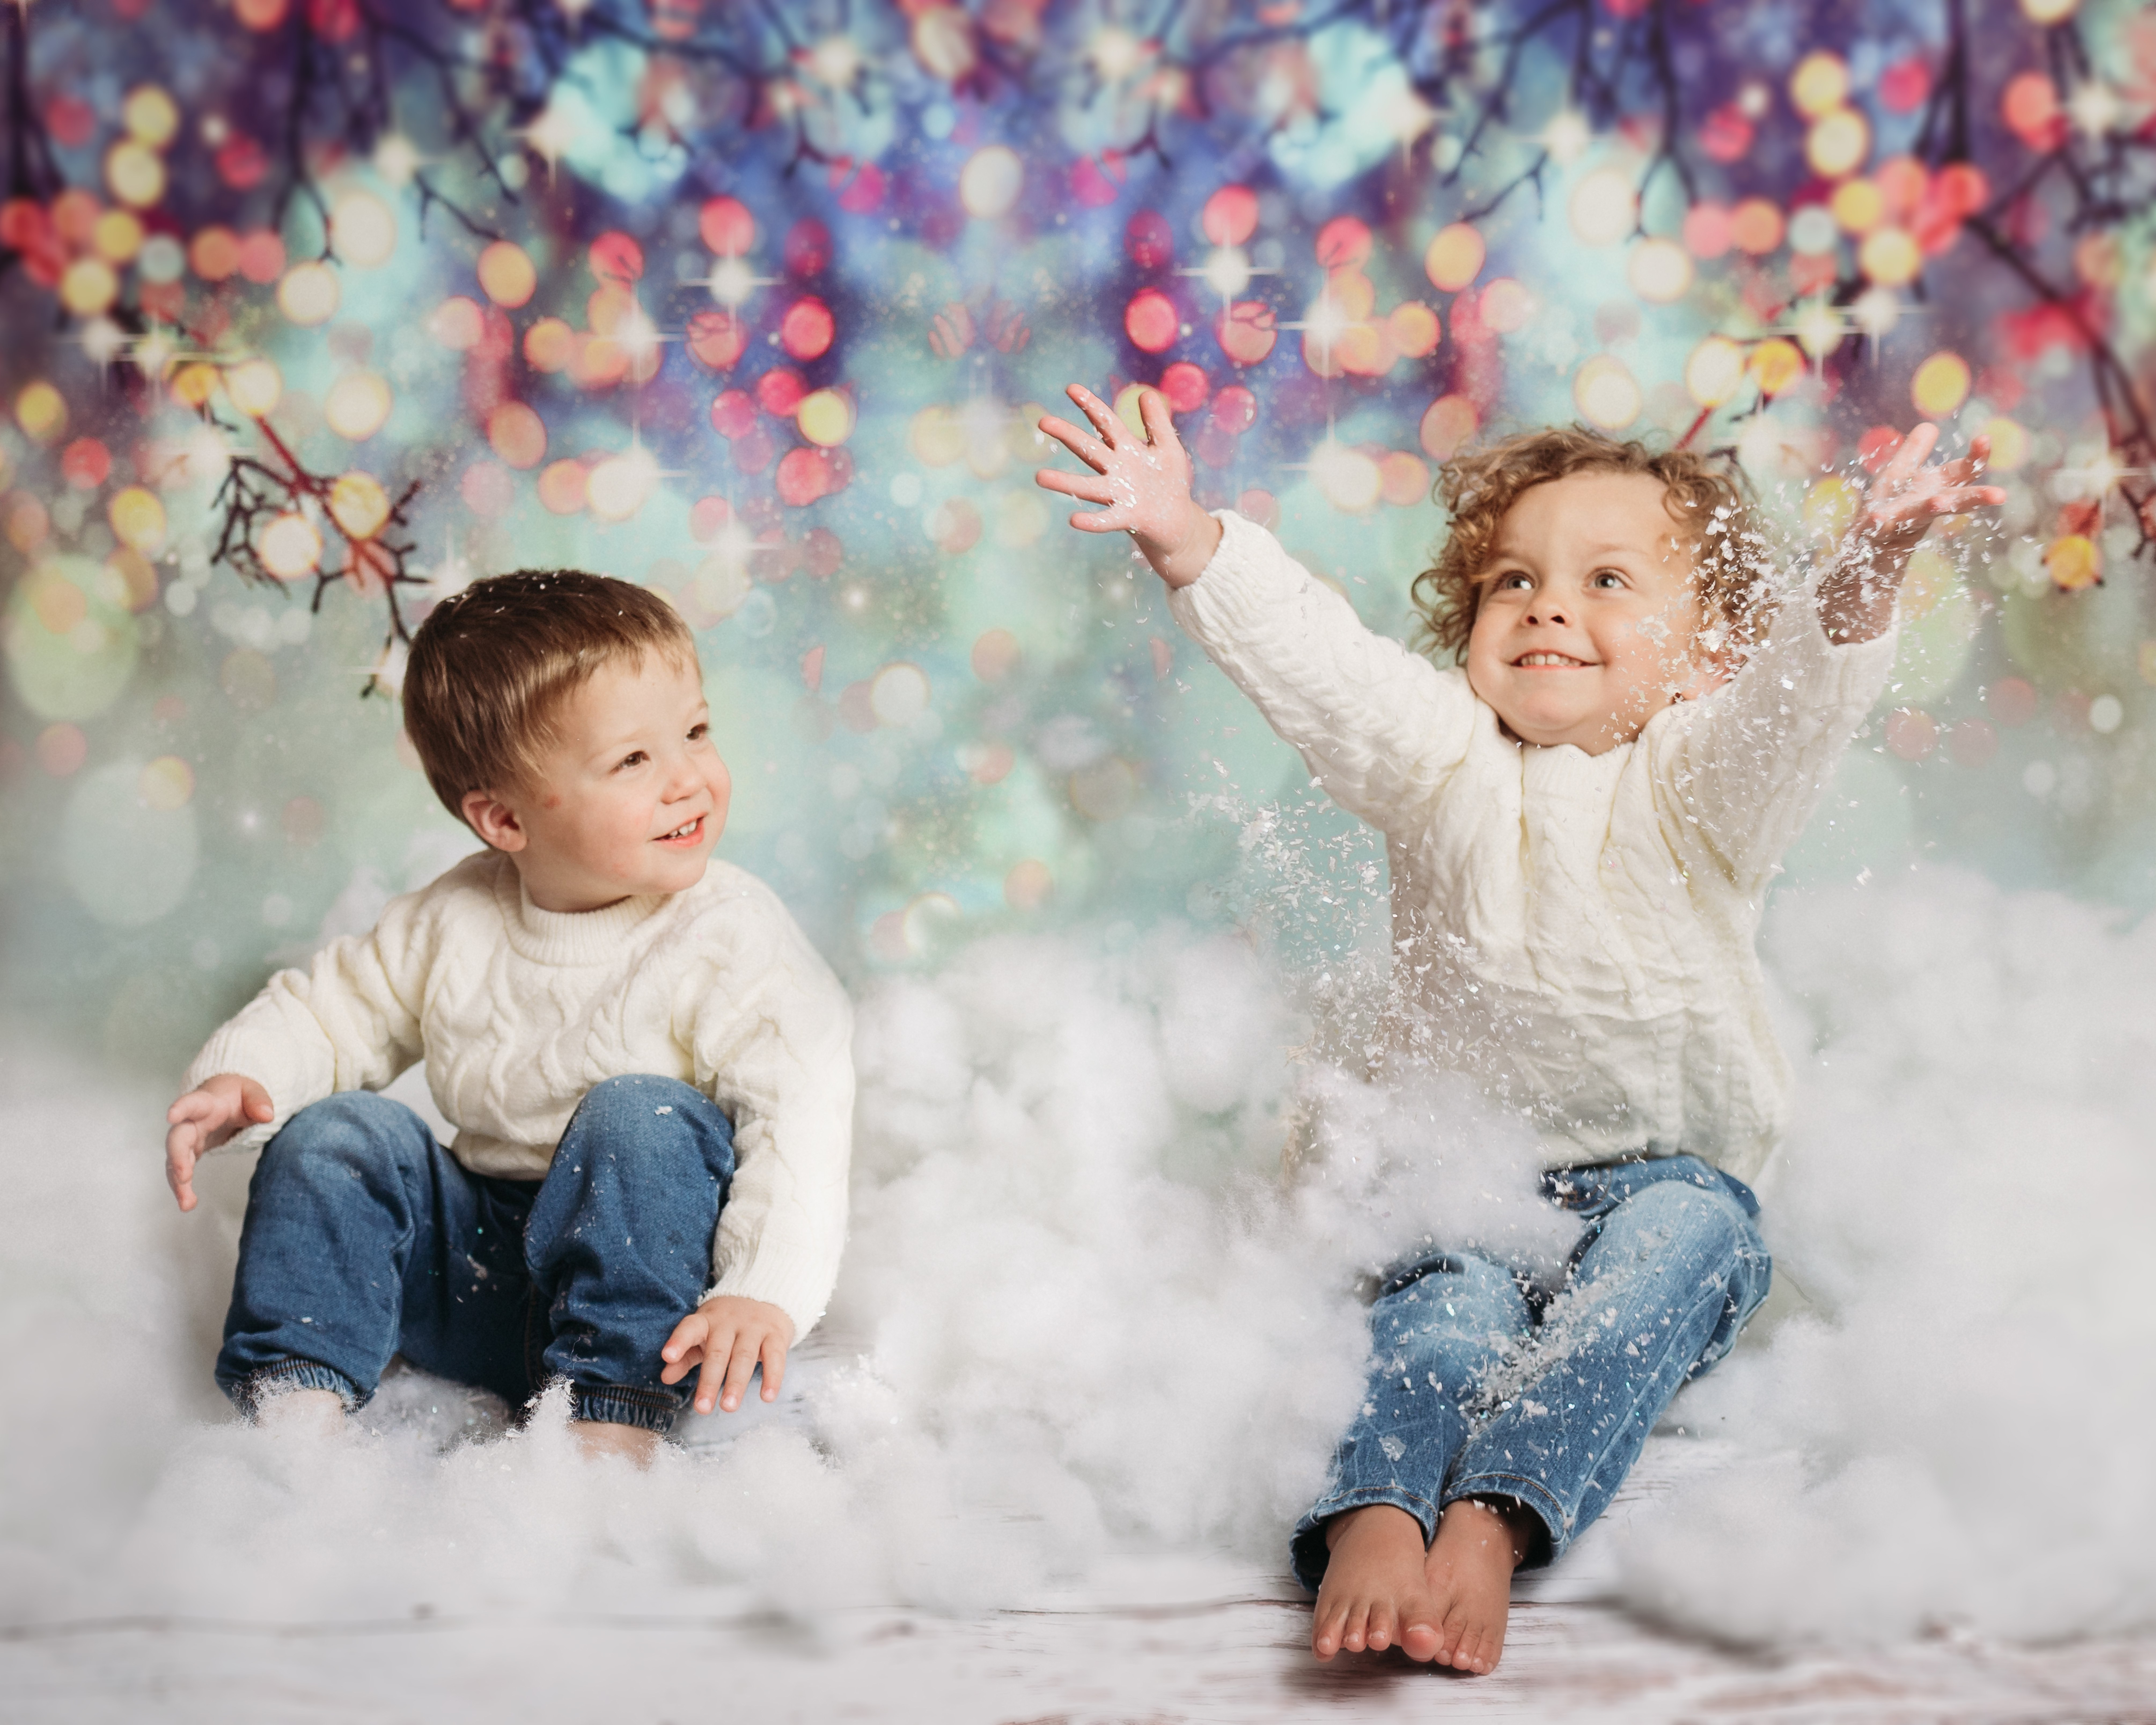 holiday photoshoot with two toddler boys in jeans and white sweaters throwing snow in front of bokeh backdrop for minneapolis family session